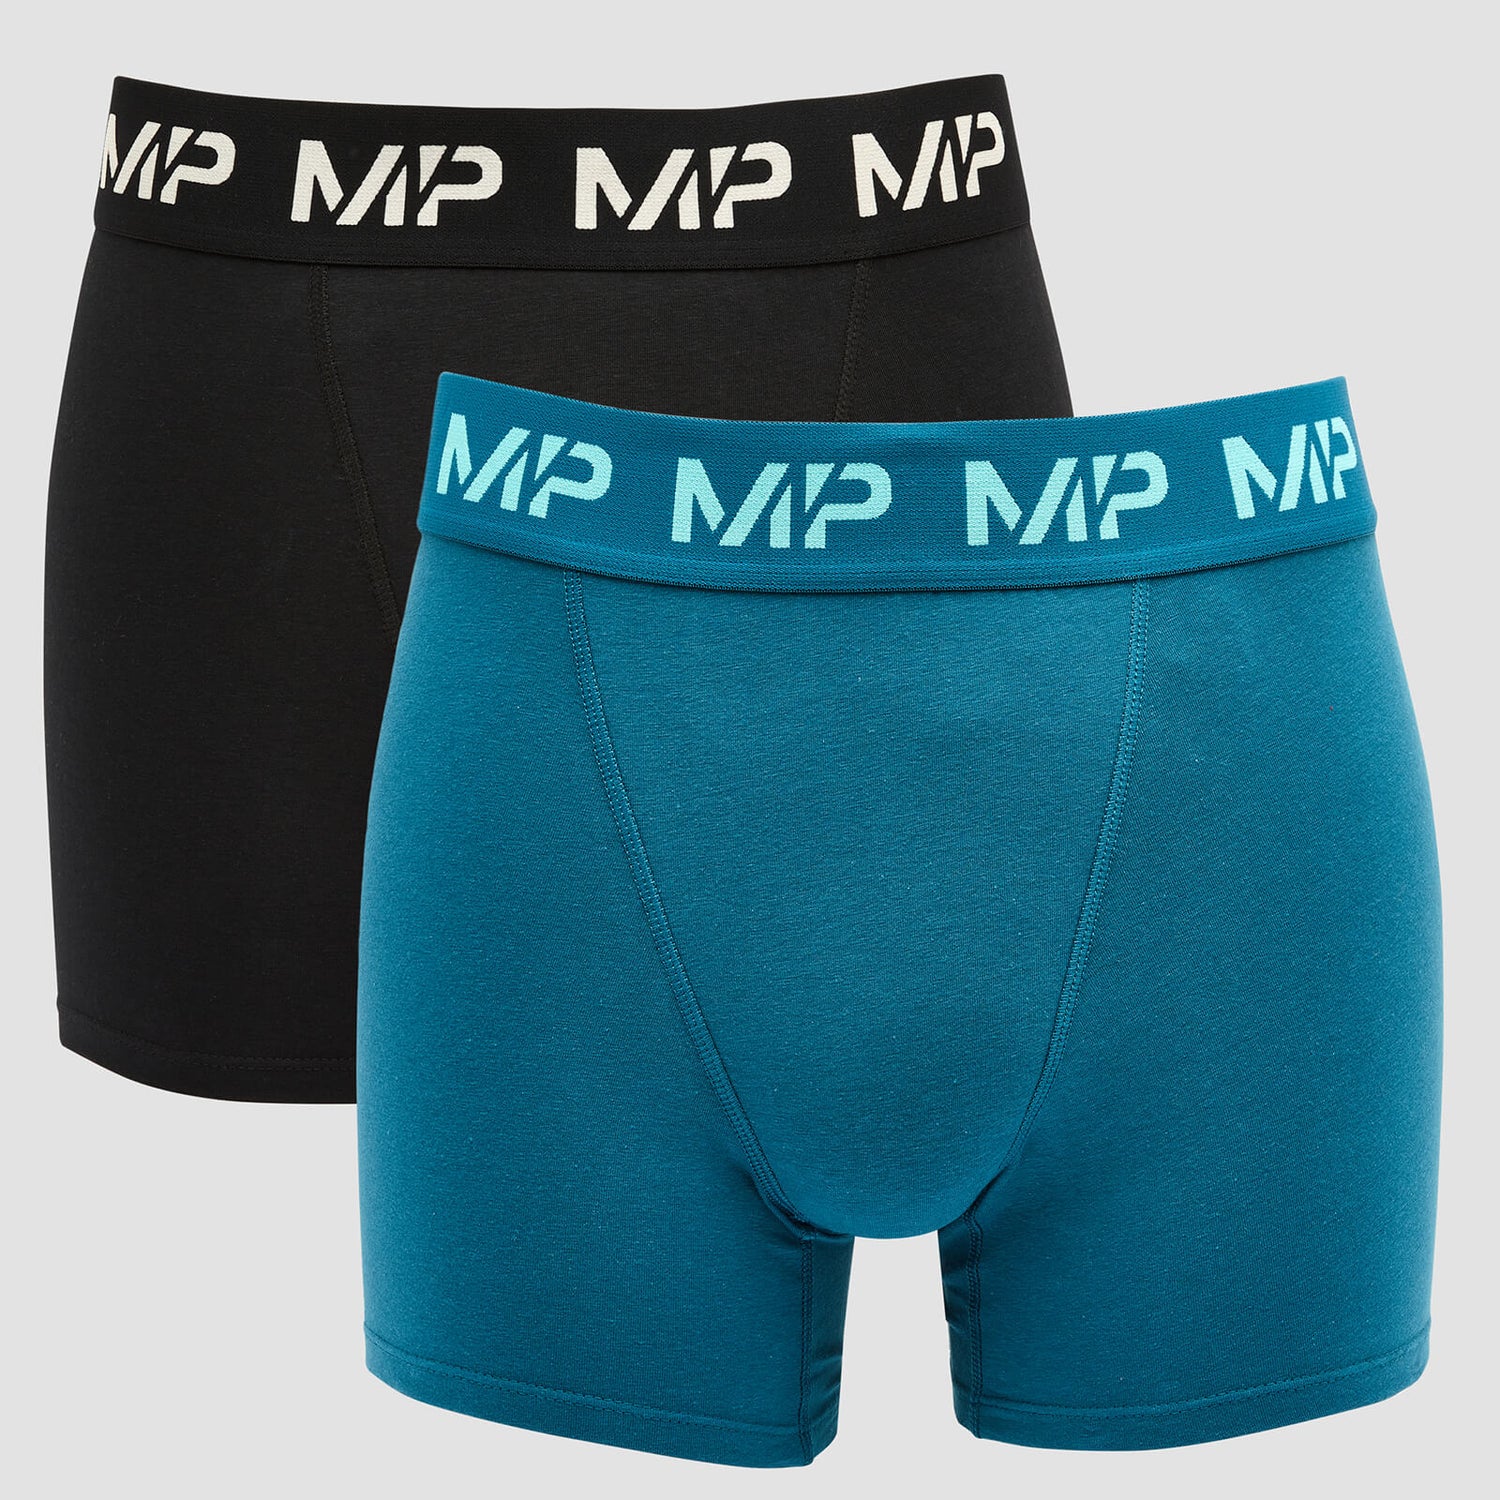 MP Men's Limited Edition Impact Essentials Boxers (2 Pack) - Black/Teal